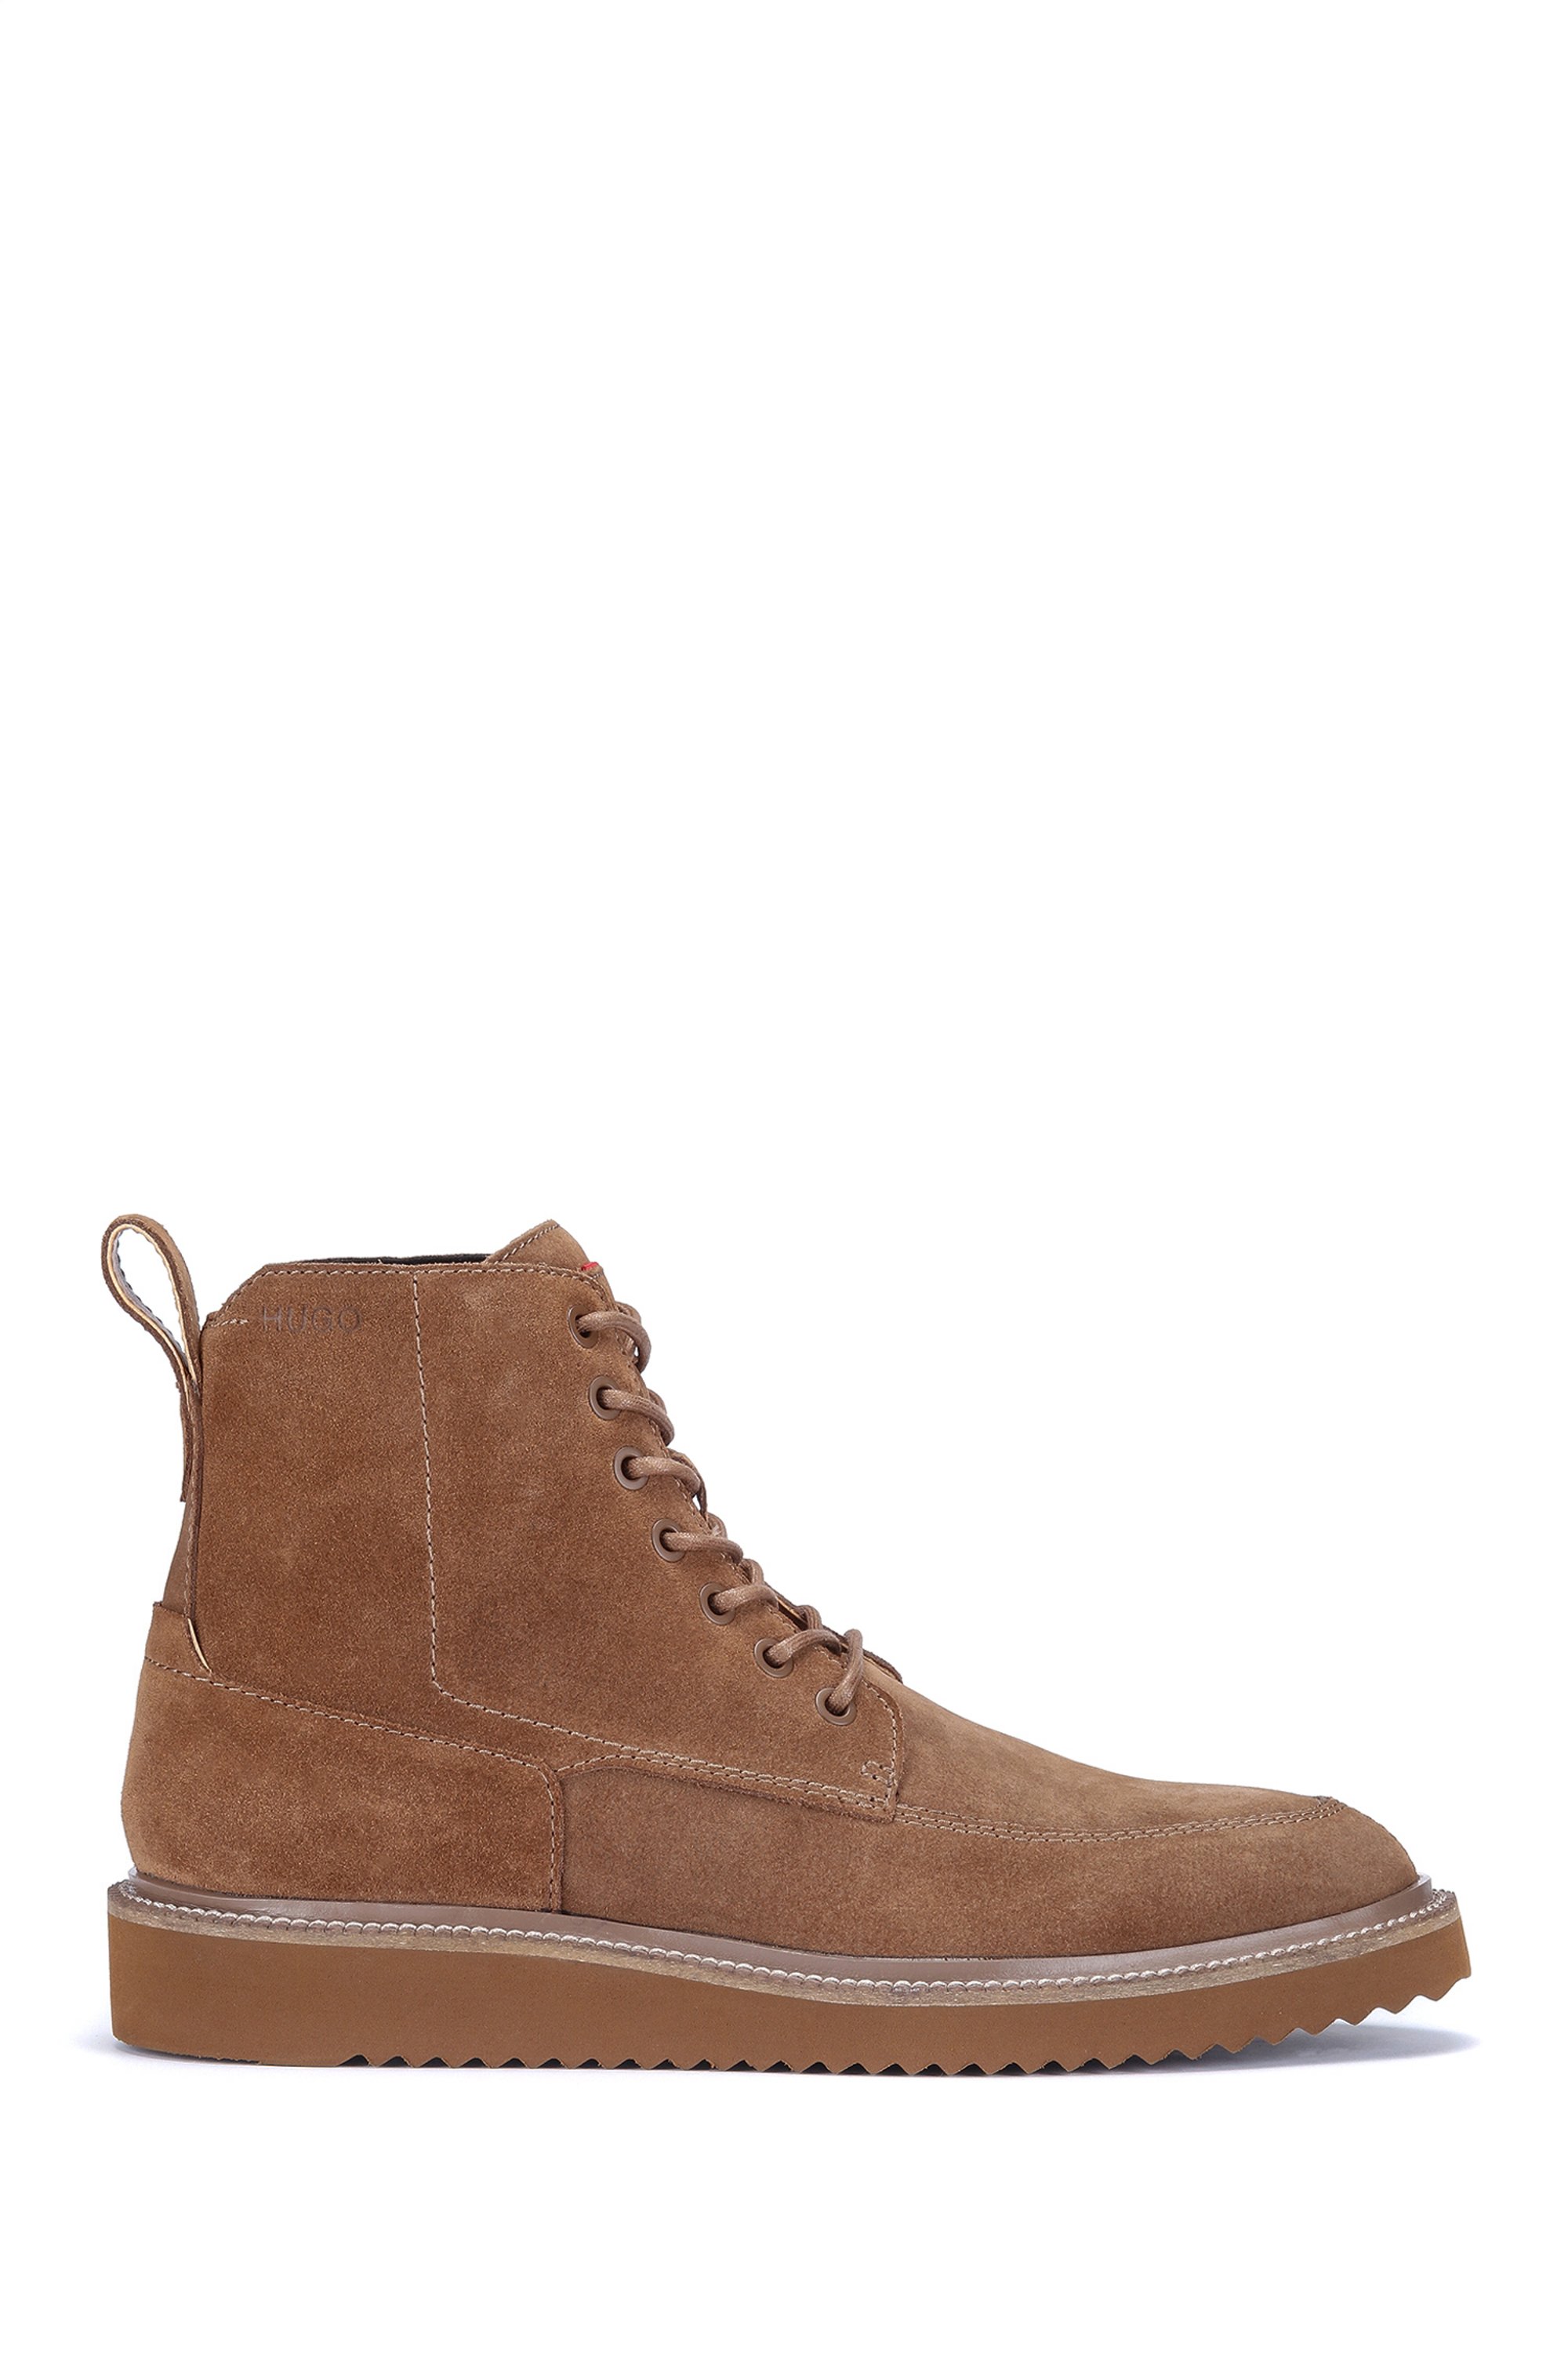 Lace-up half boots in suede with logo details, Brown